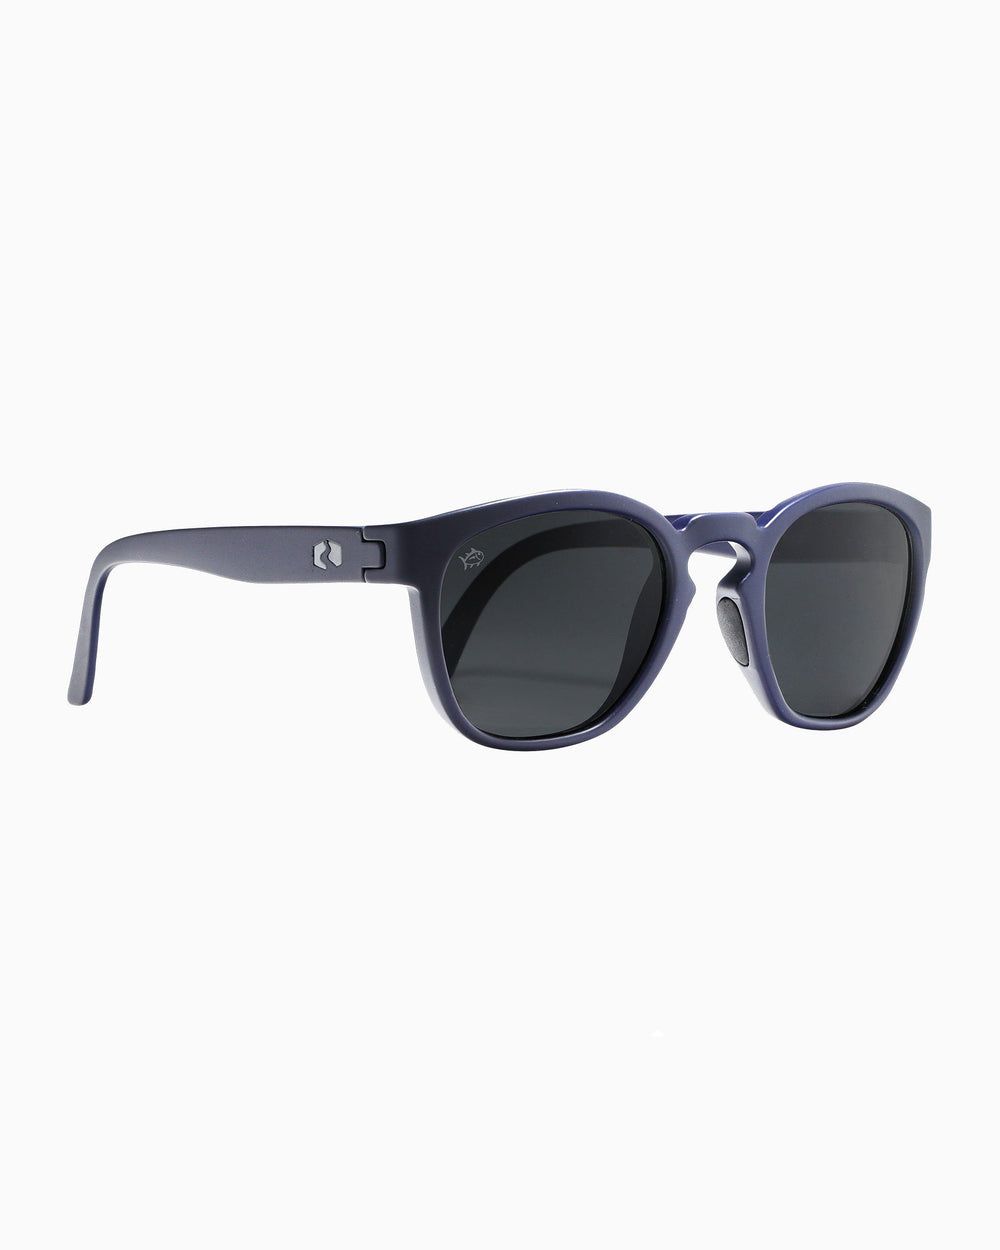 The side of the Rheos Seabrooks Sunglasses by Southern Tide - Boat Blue Gunmetal